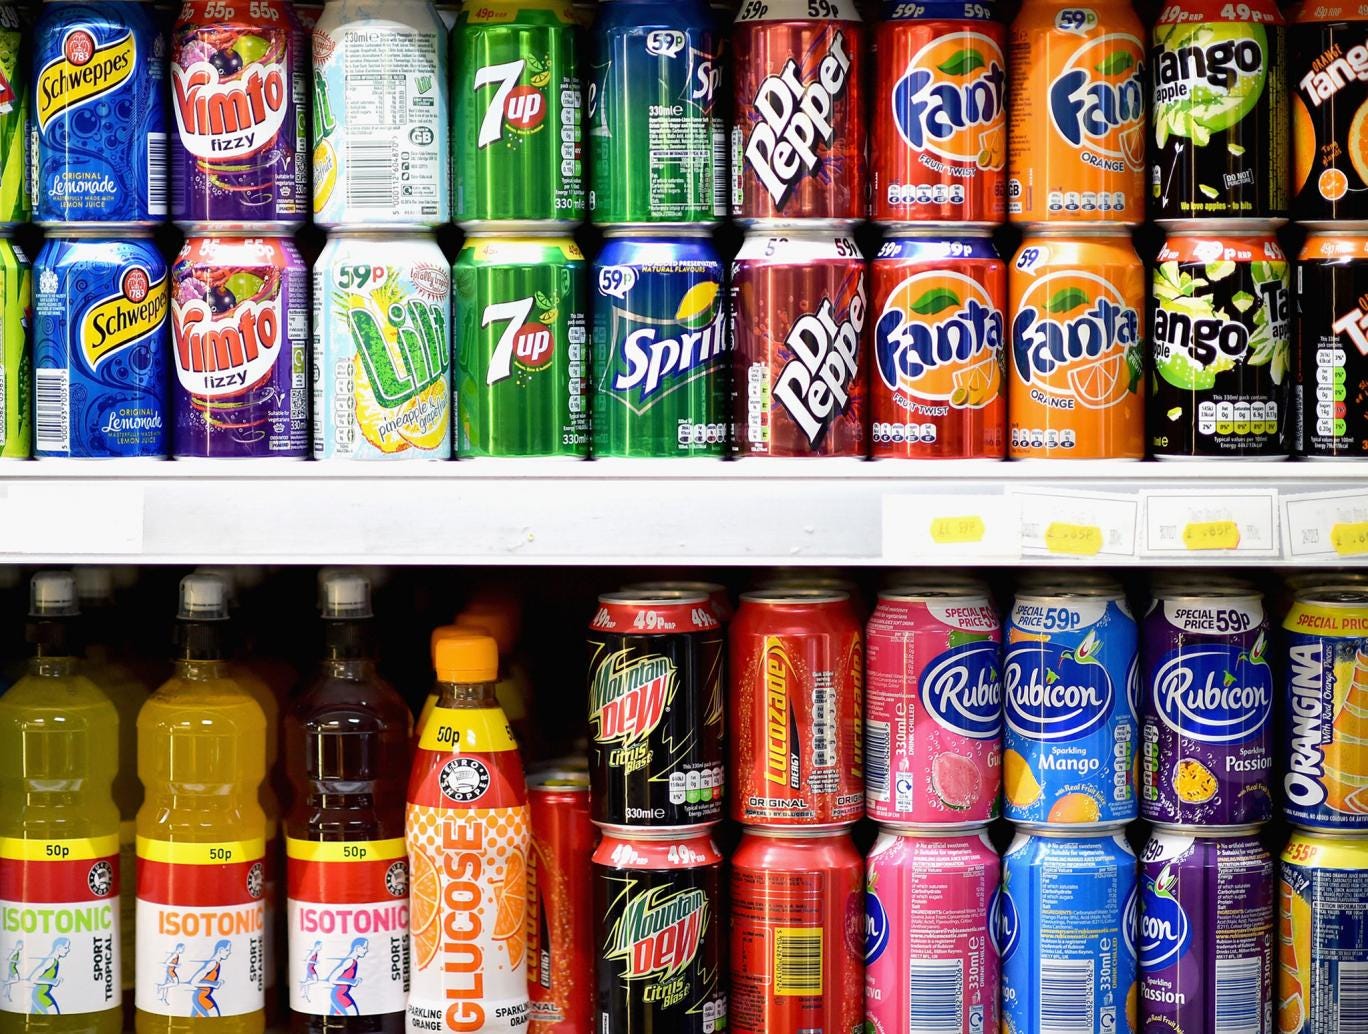 What Would Happen If You Only Consumed Fizzy Drinks Health News Lifestyle The Independent